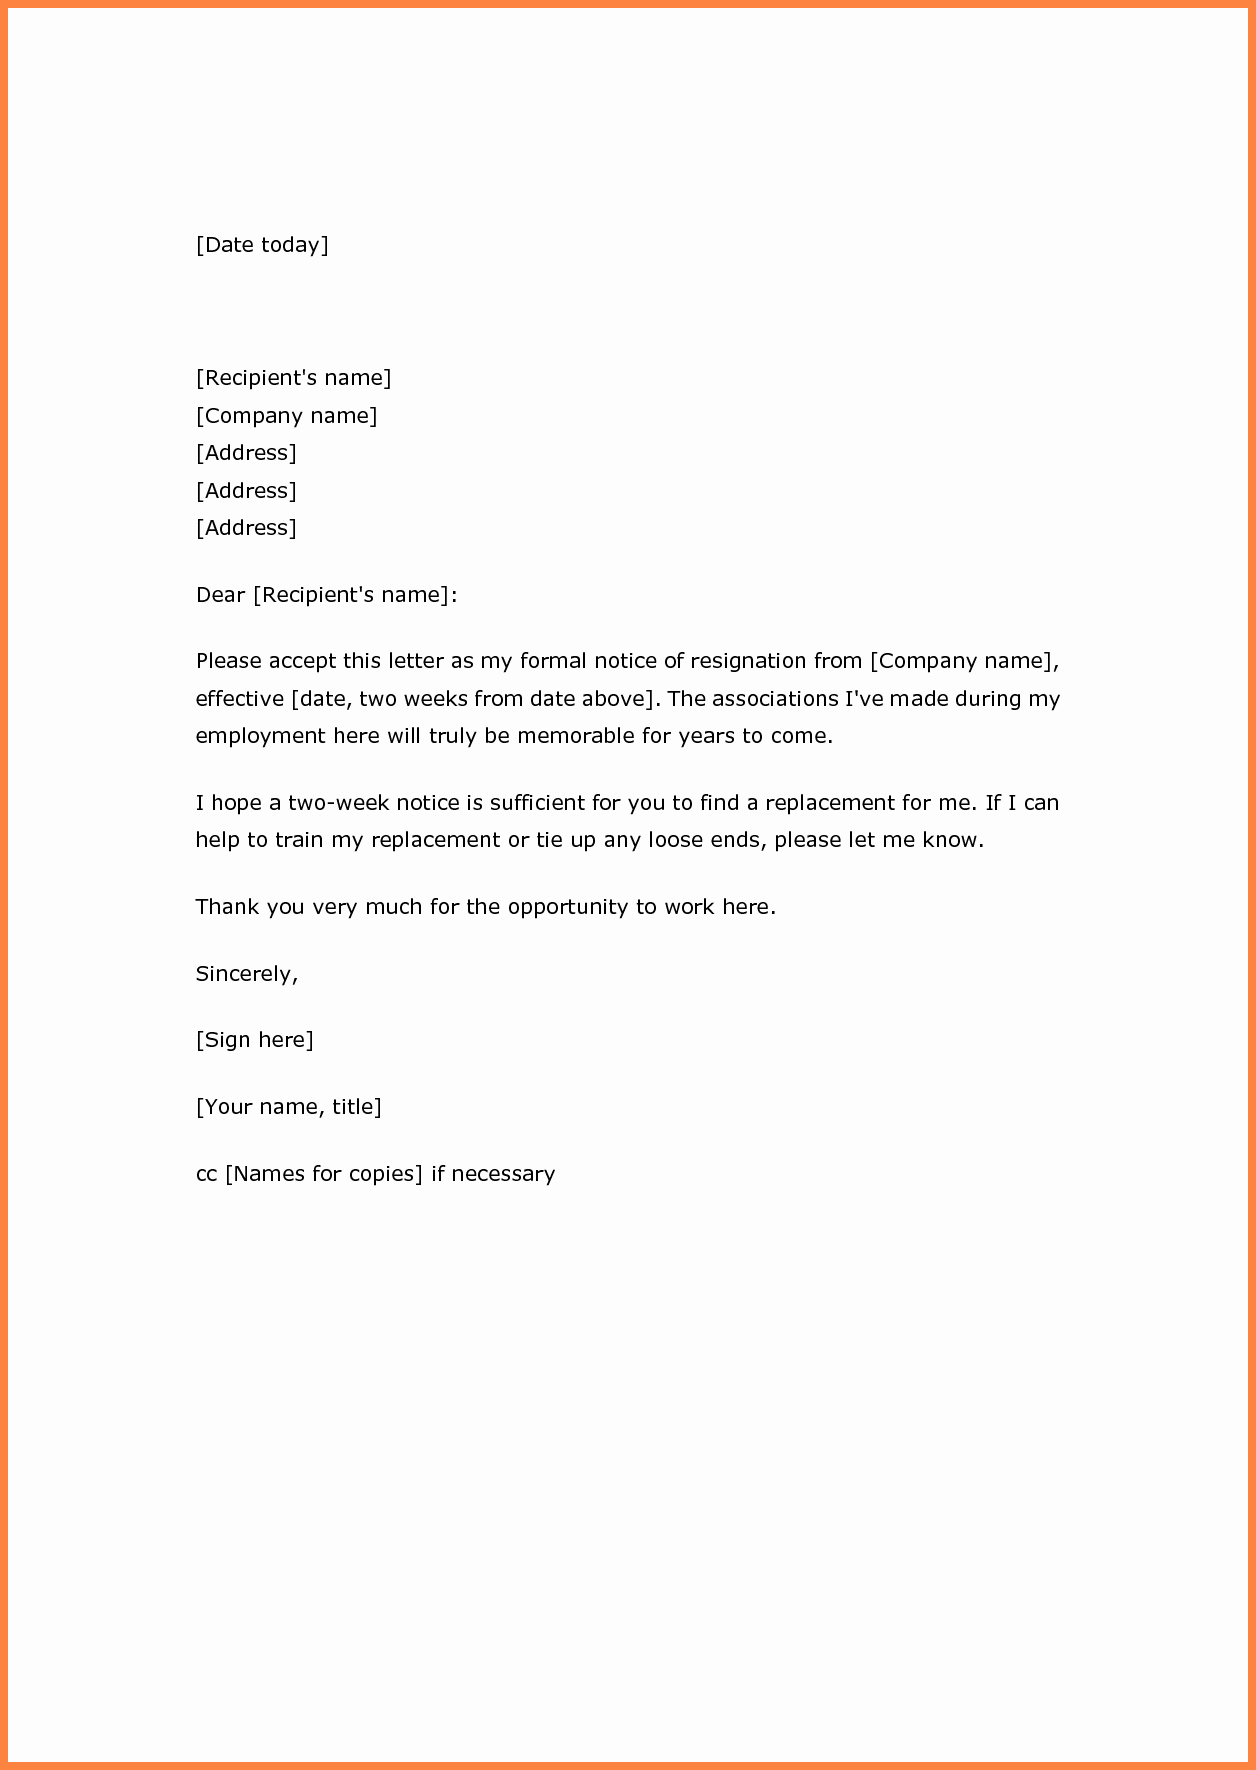 Two Weeks Notice Template Retail Inspirational 9 2 Weeks Notice Letter Sample Retail